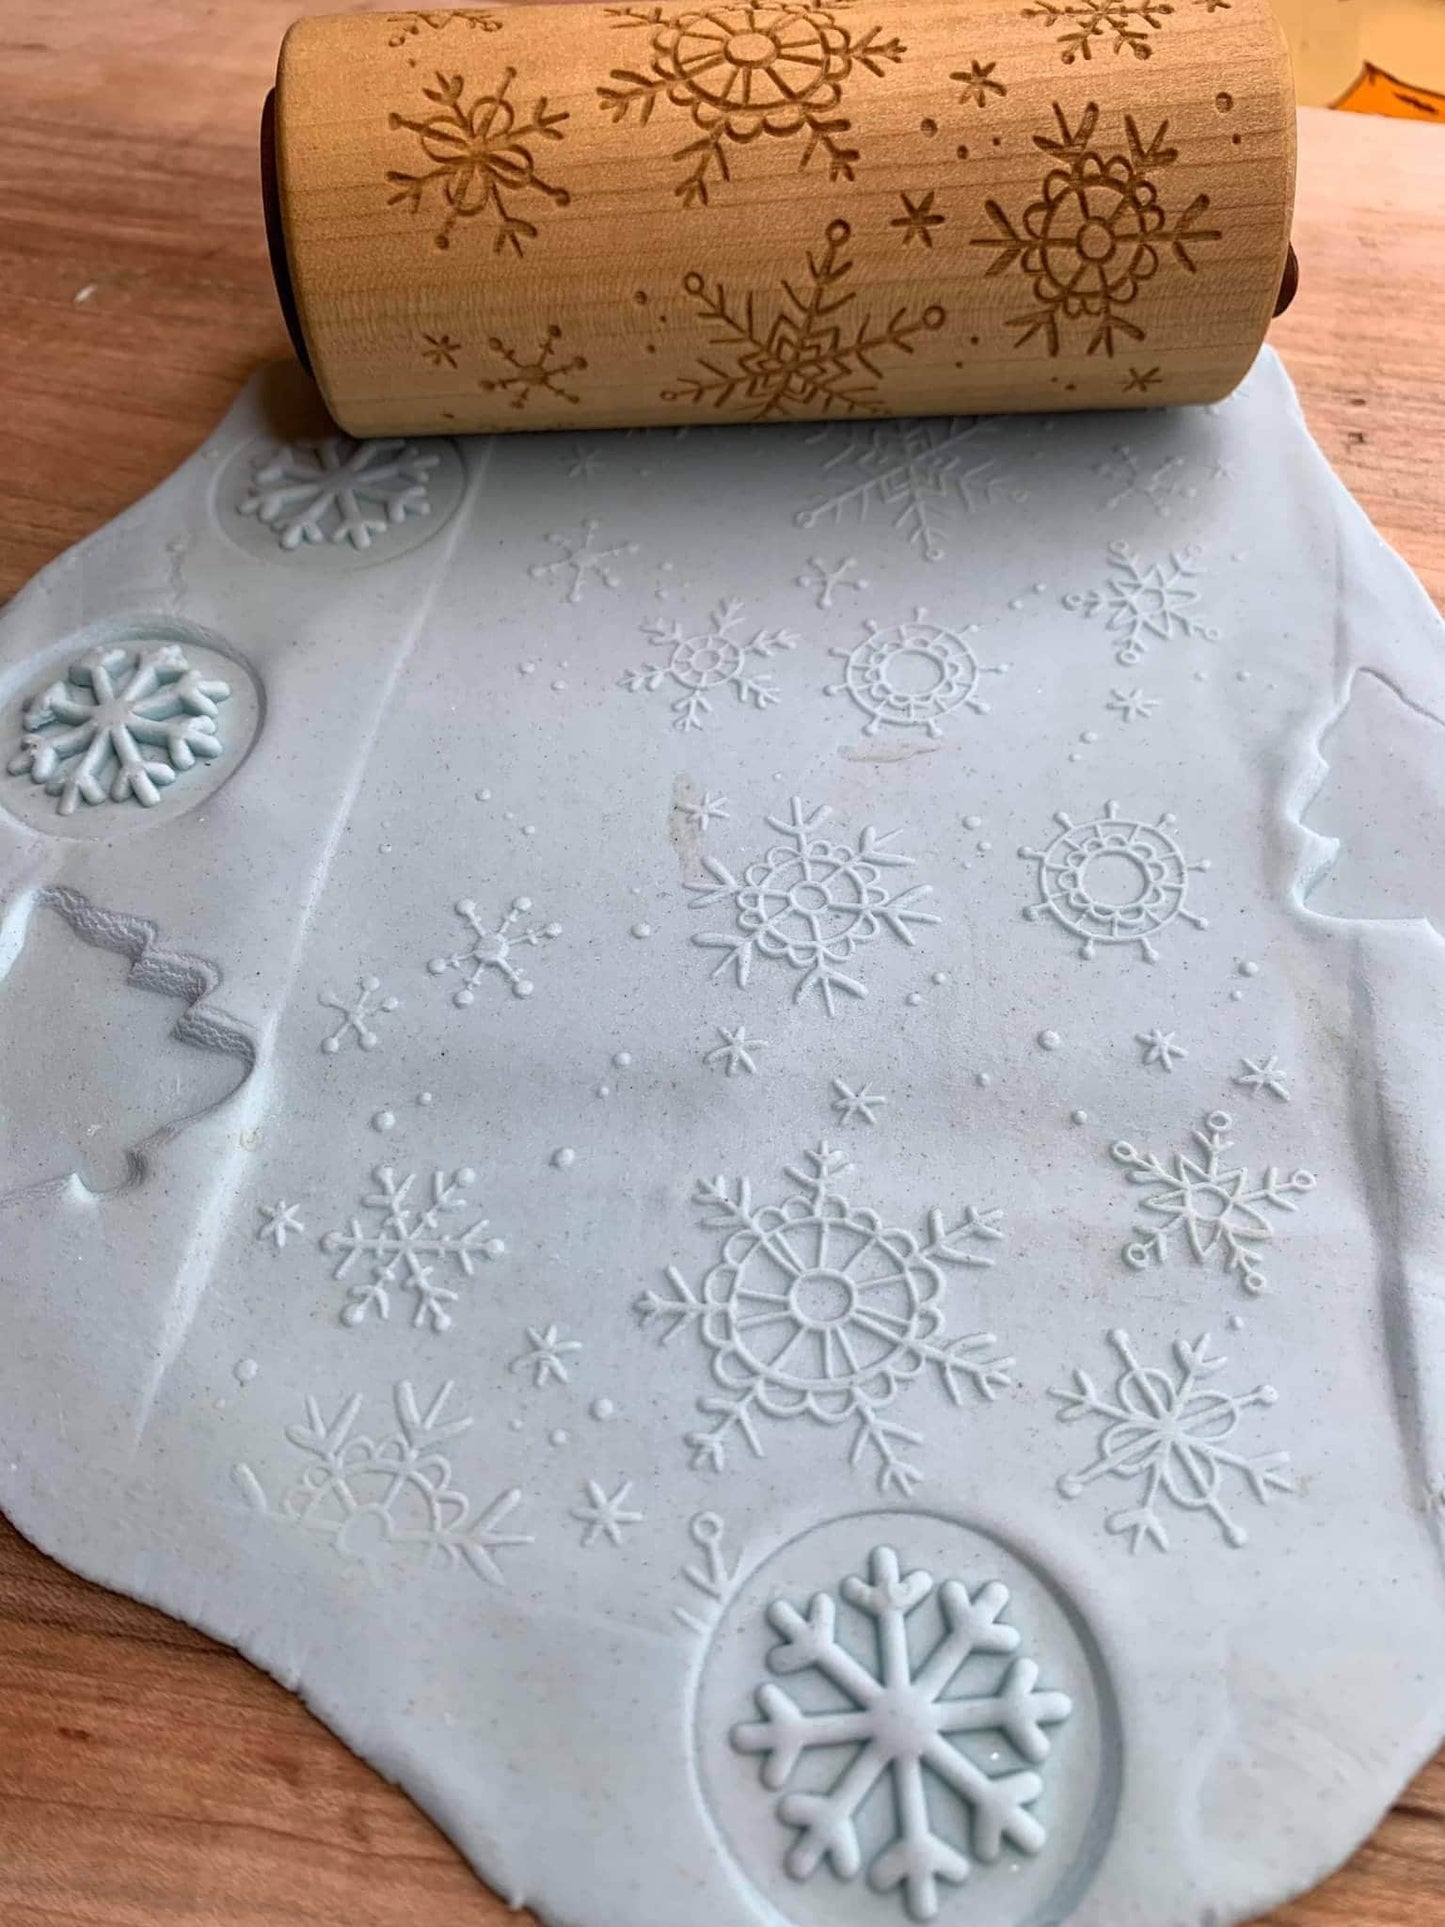 Play dough stamped with snowflake shapes next tp snowflake rolling pin